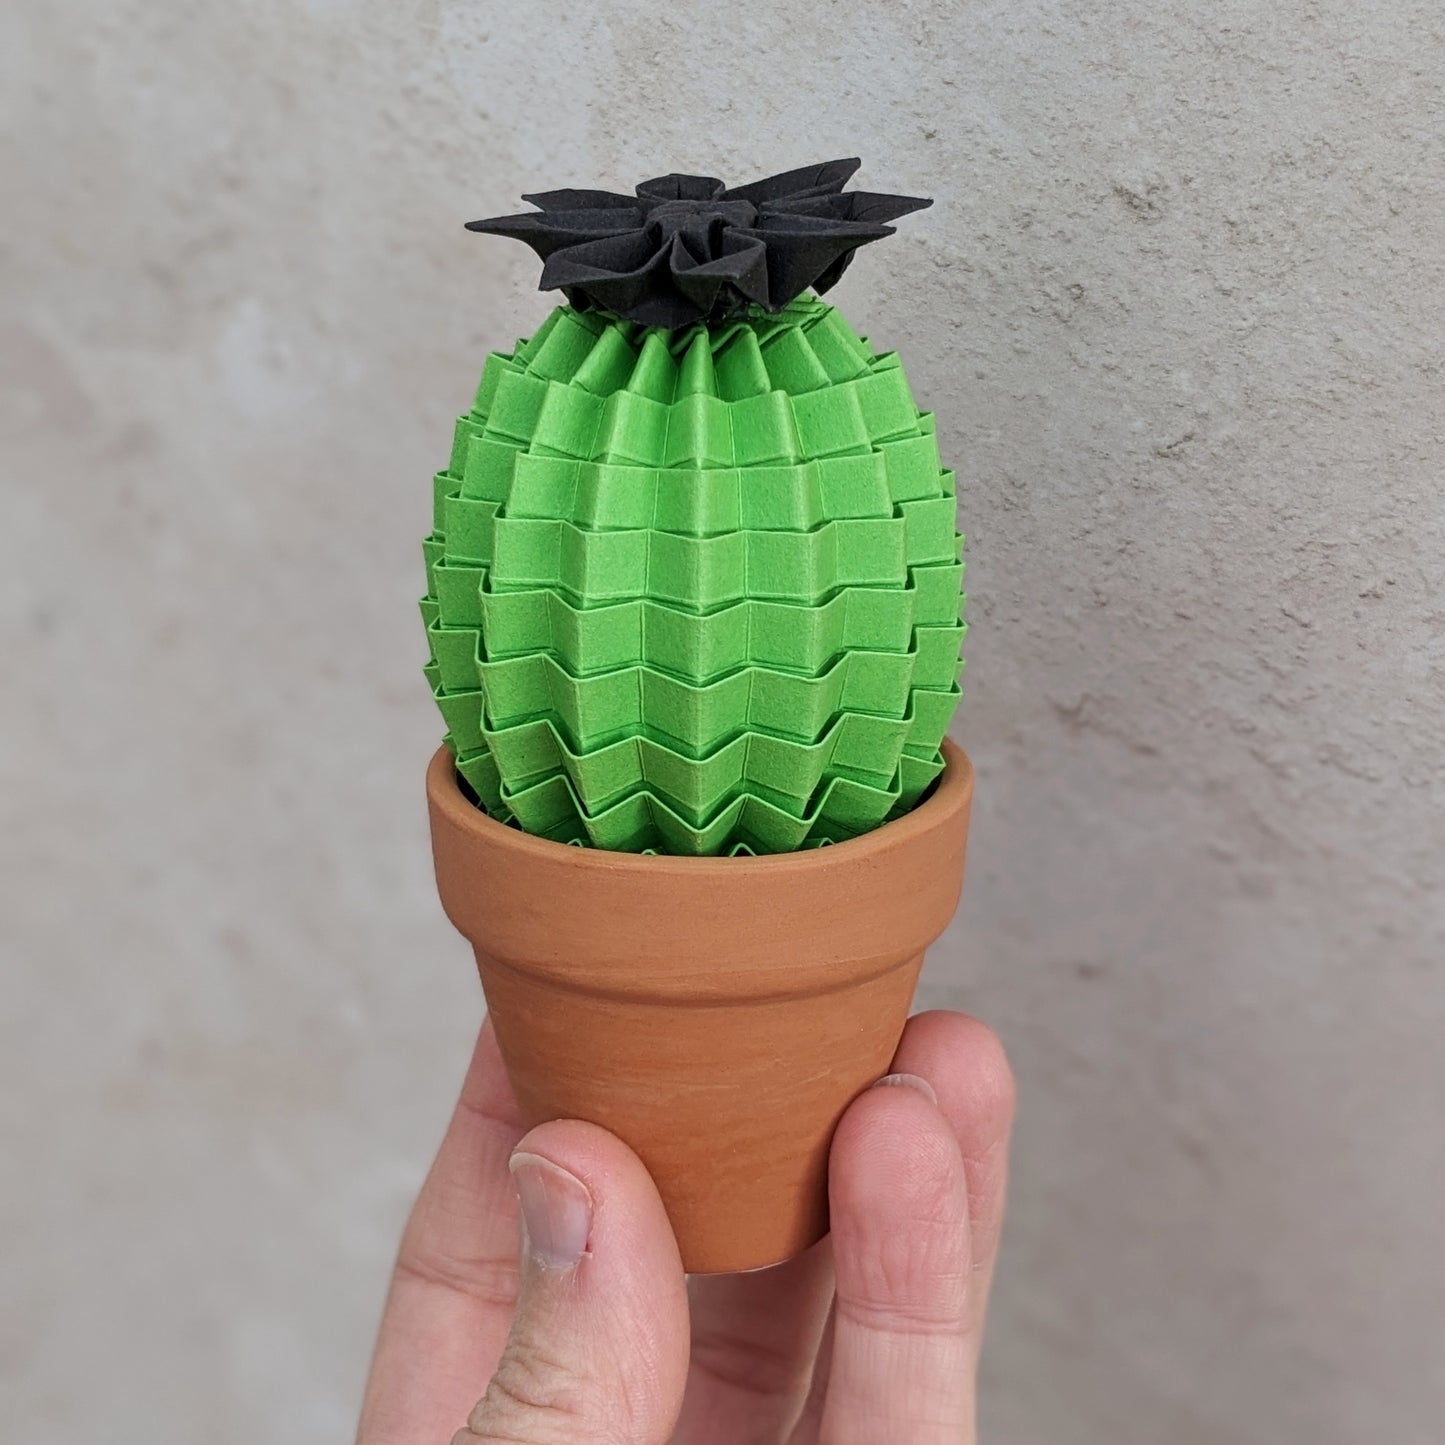 a hand holds a mini lime green origami paper cactus in a small terracotta pot. The cactus has a black paper flower on top